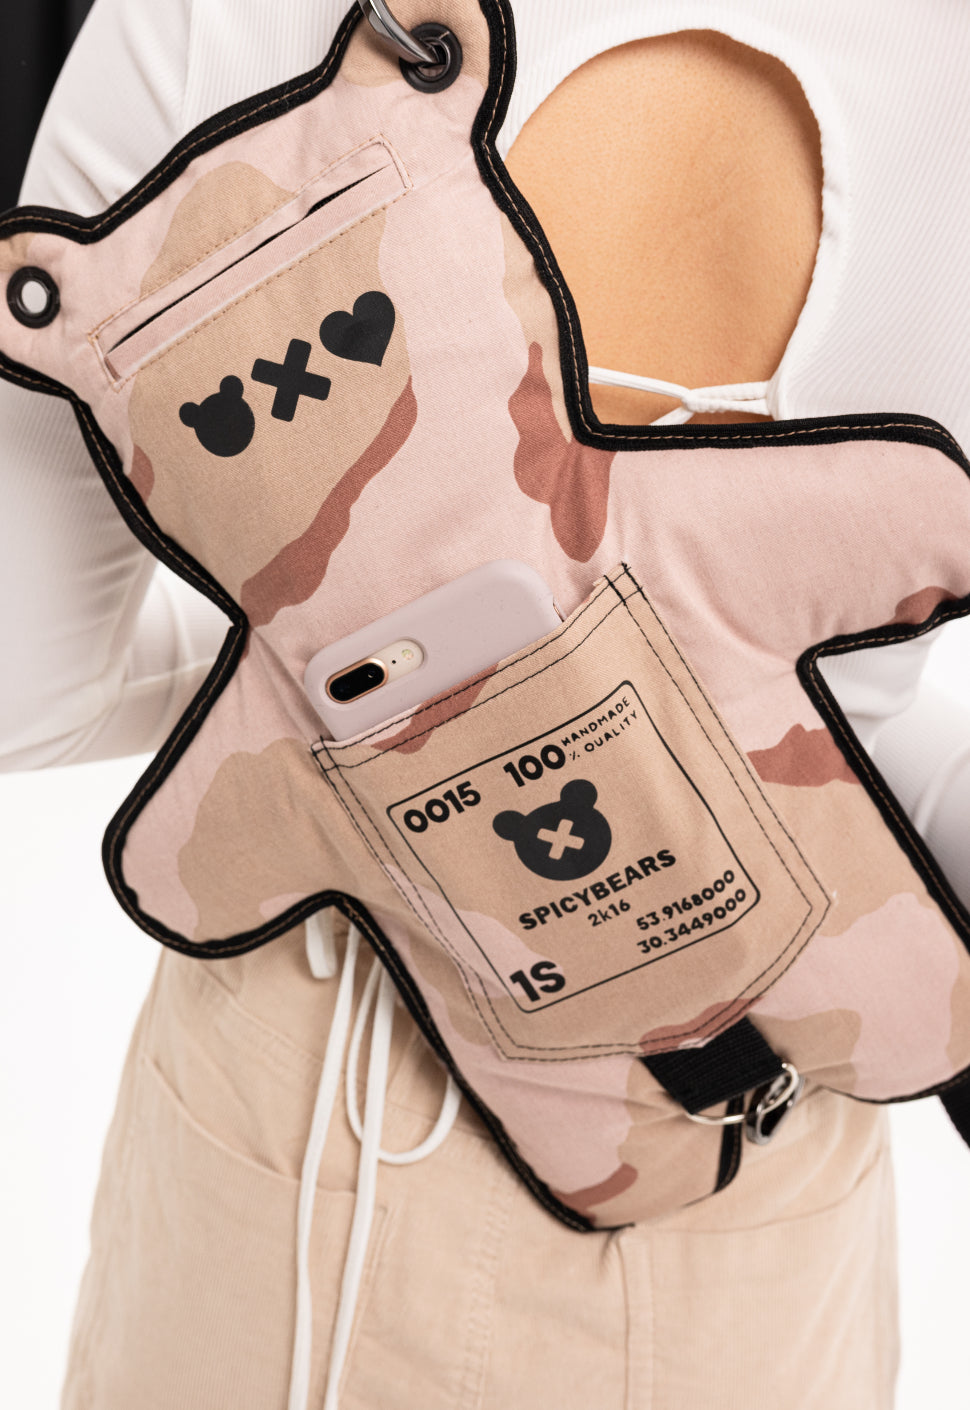 Sandy SPICYBEARS Bag that blends edgy camo streetwear with practical, tactical features like spacious pockets